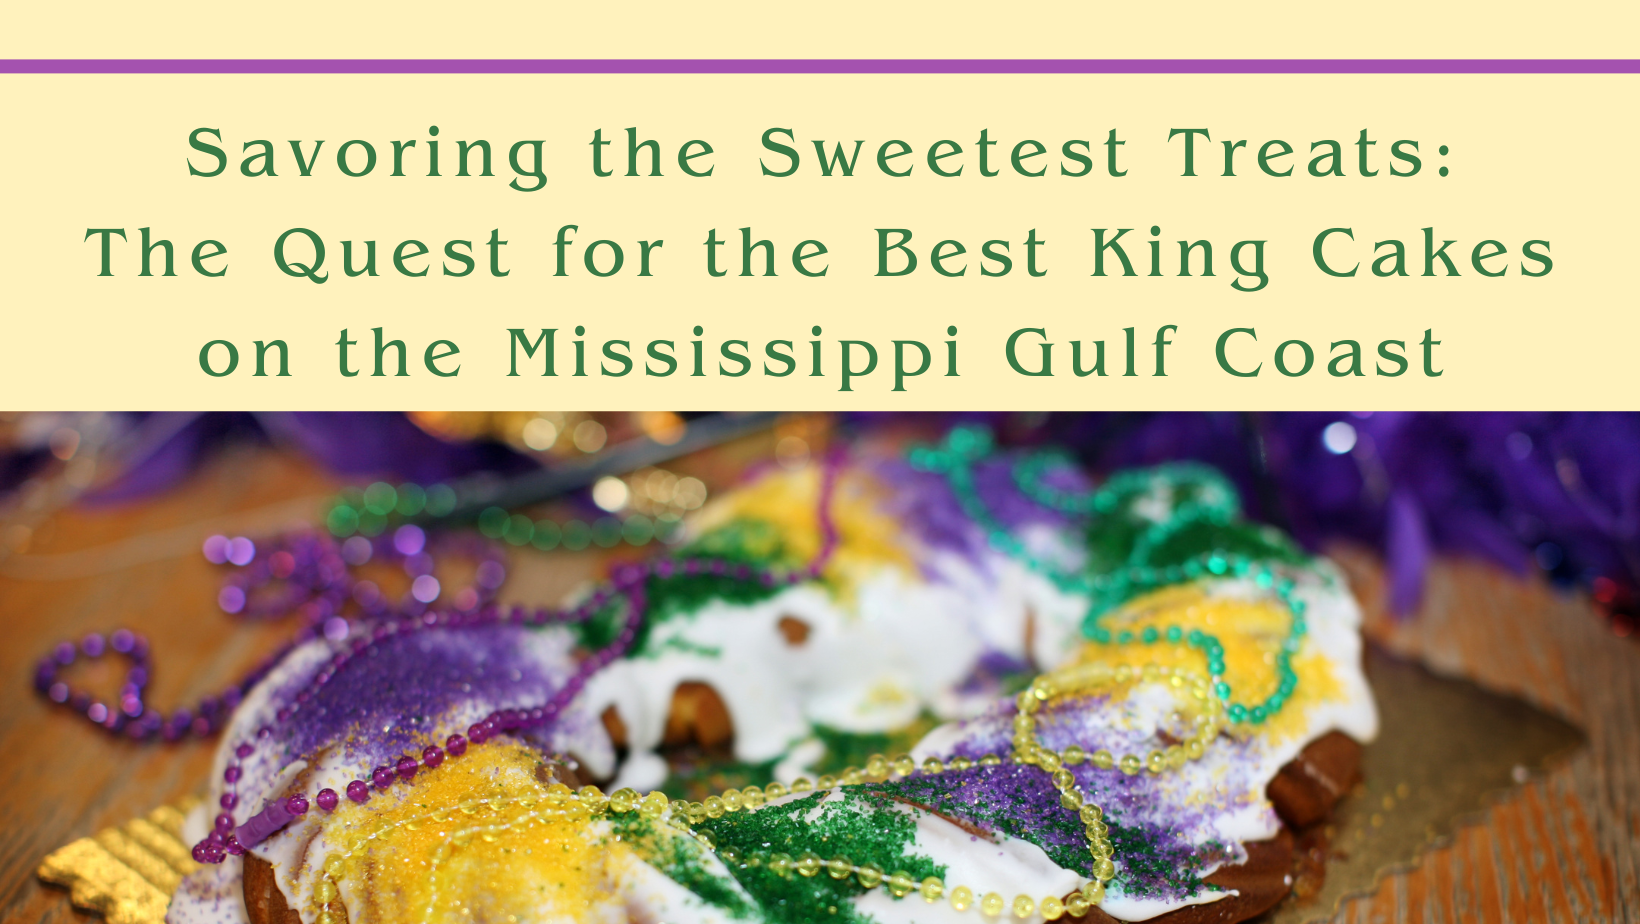 Savoring the Sweetest Treats: The Quest for the Best King Cakes on the Mississippi Gulf Coast